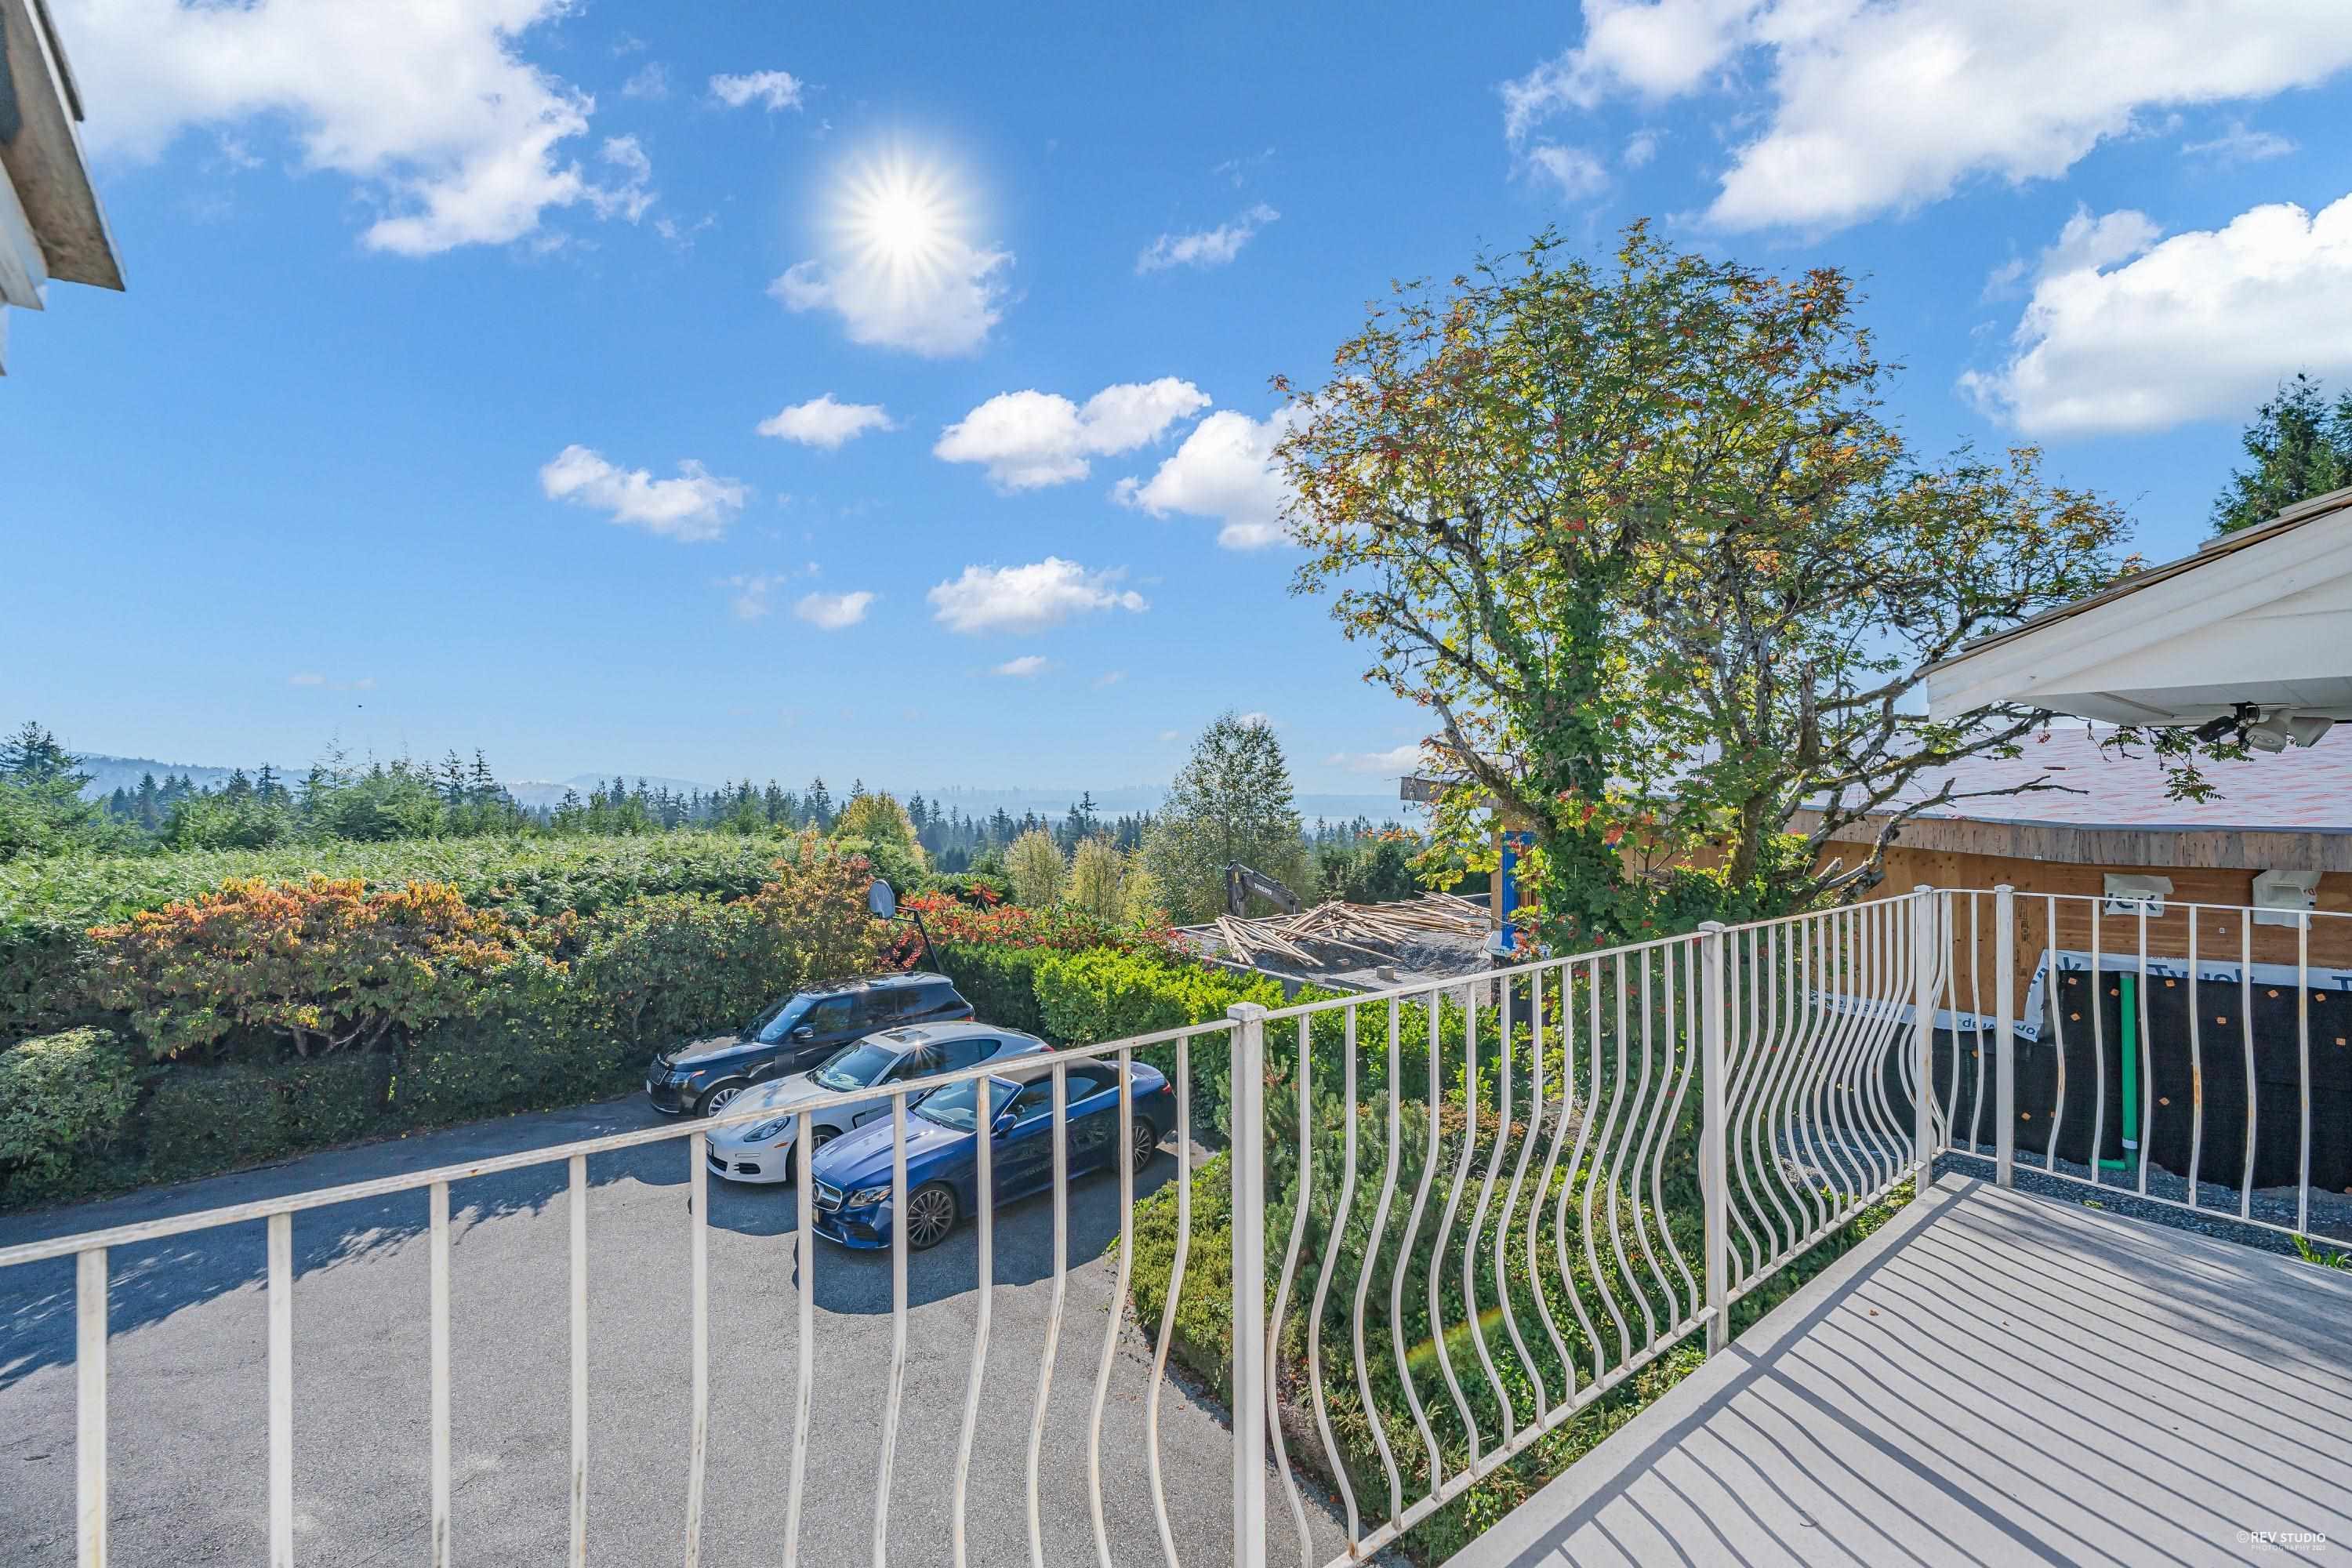 Listing image of 685 KING GEORGES WAY